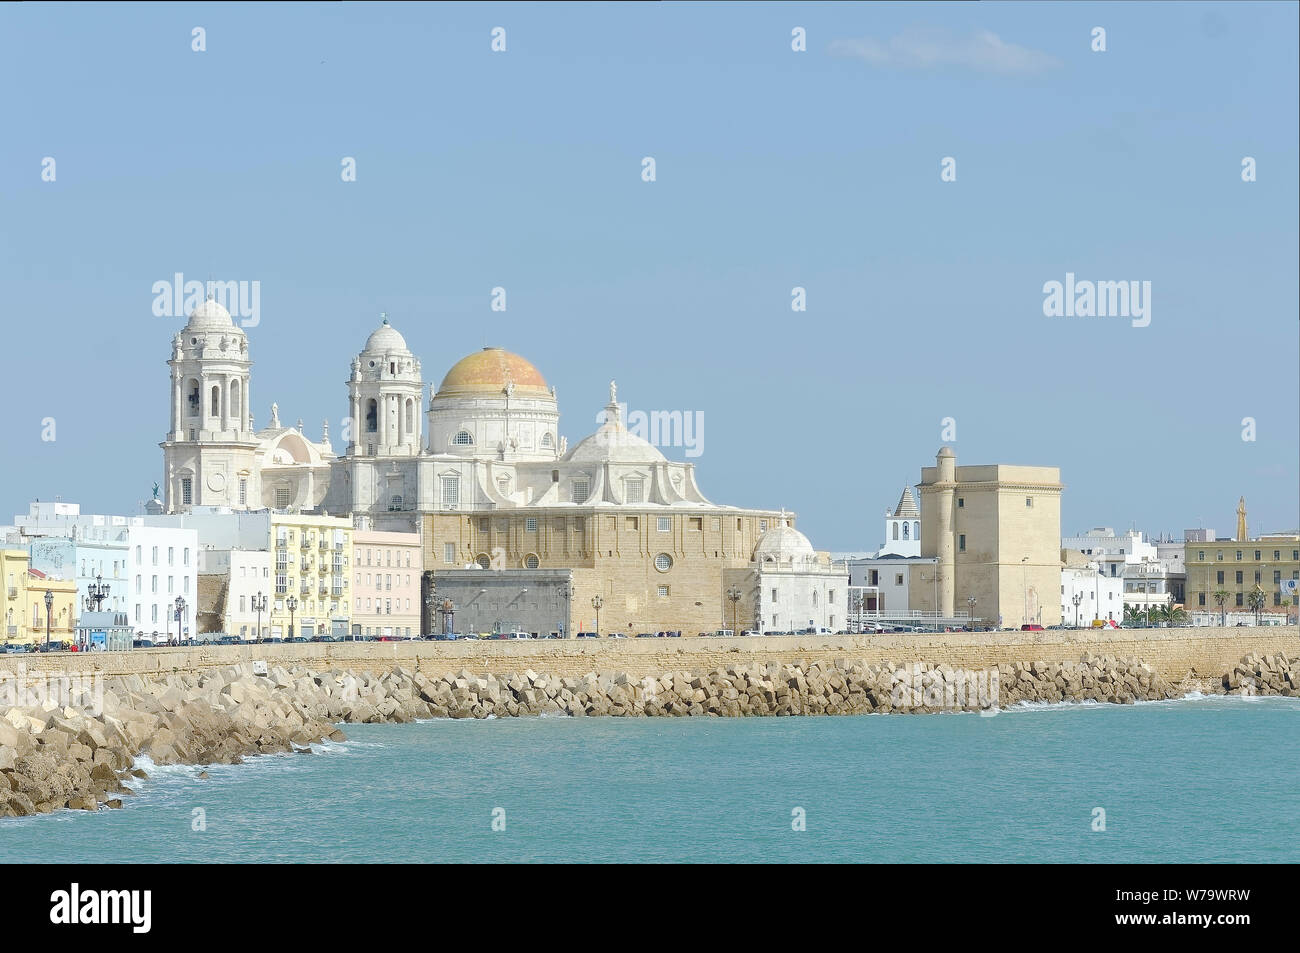 Cádiz,one of the oldest continuously inhabited cities in Western Europe,with archaeological remains dating 3100 years was founded by the Phoenicians. Stock Photo